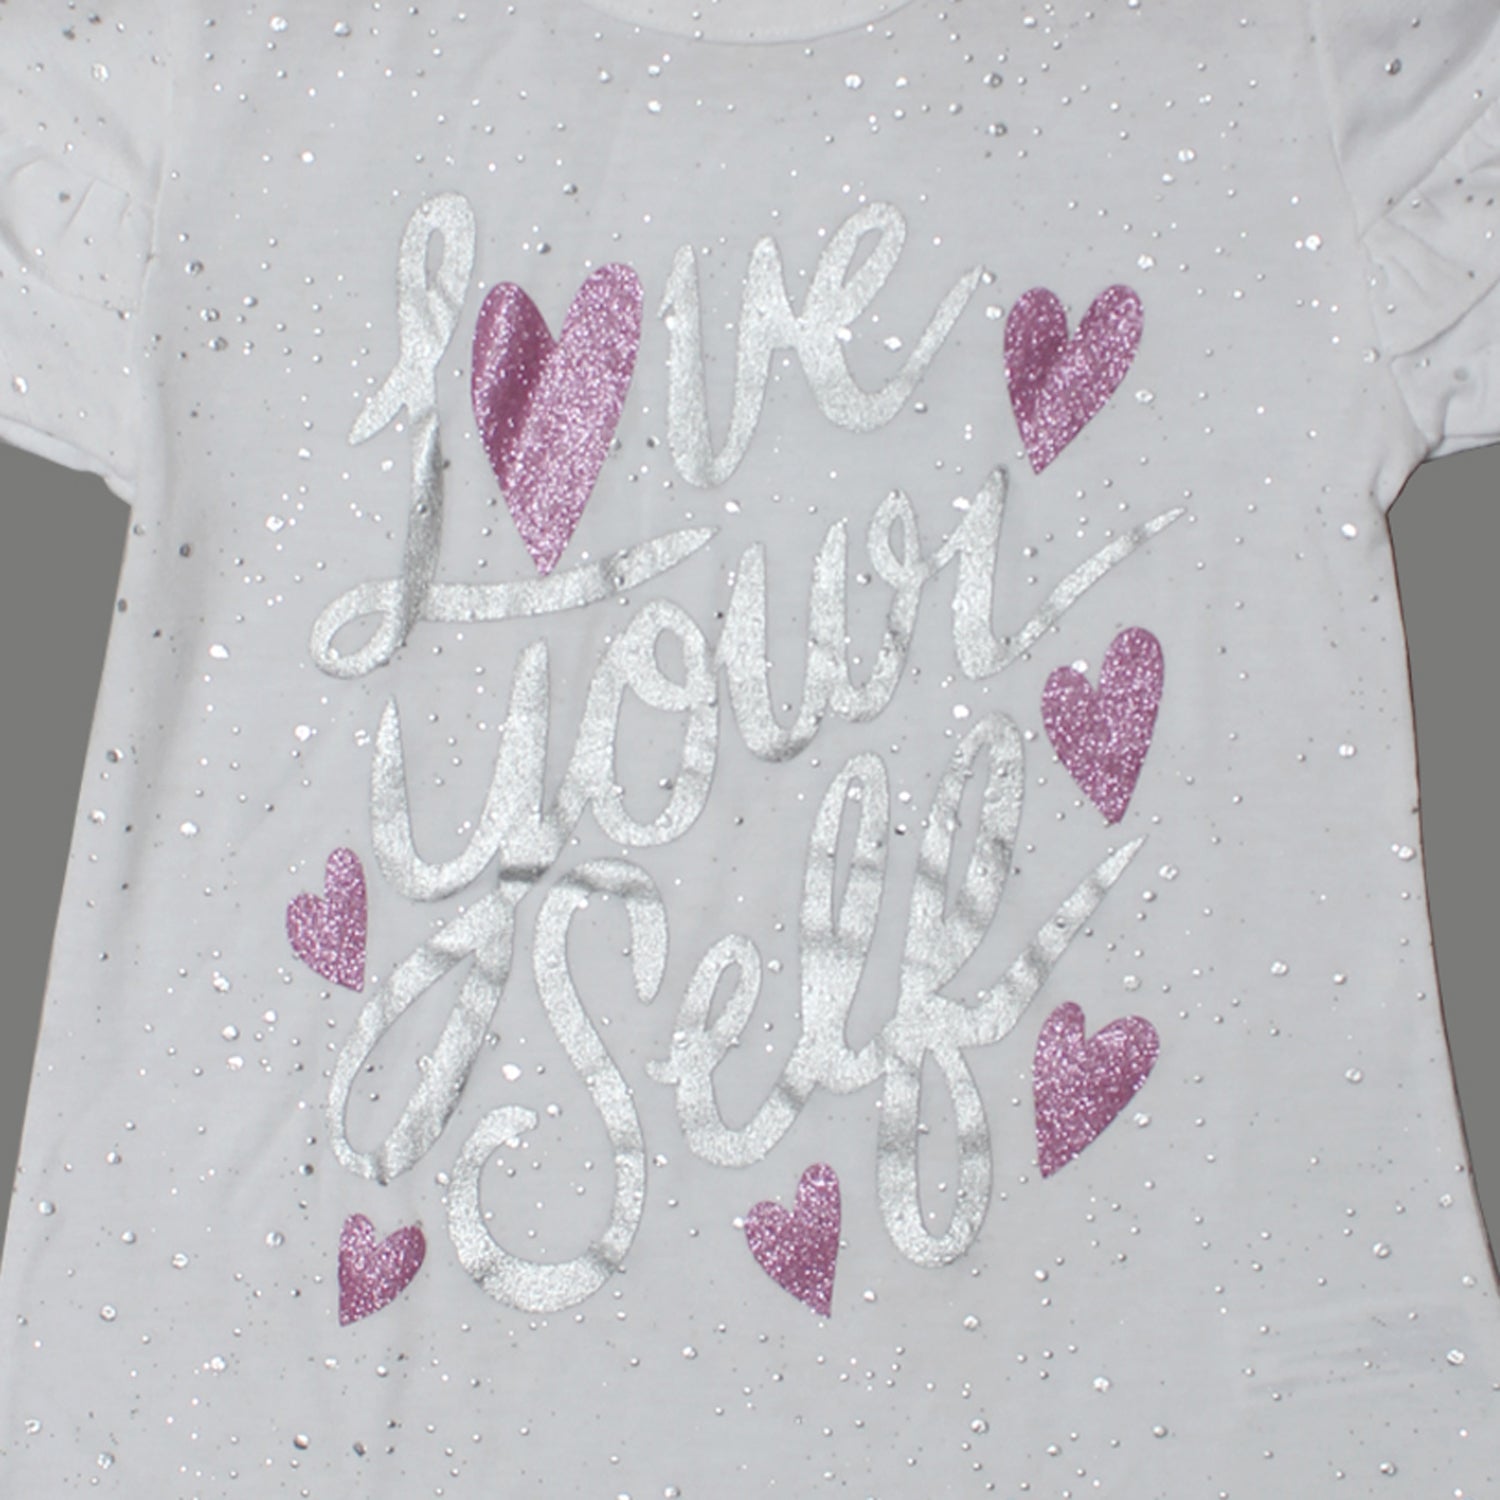 NEW WHITE LOVE YOURSELF PRINTED HALF SLEEVES T-SHIRT